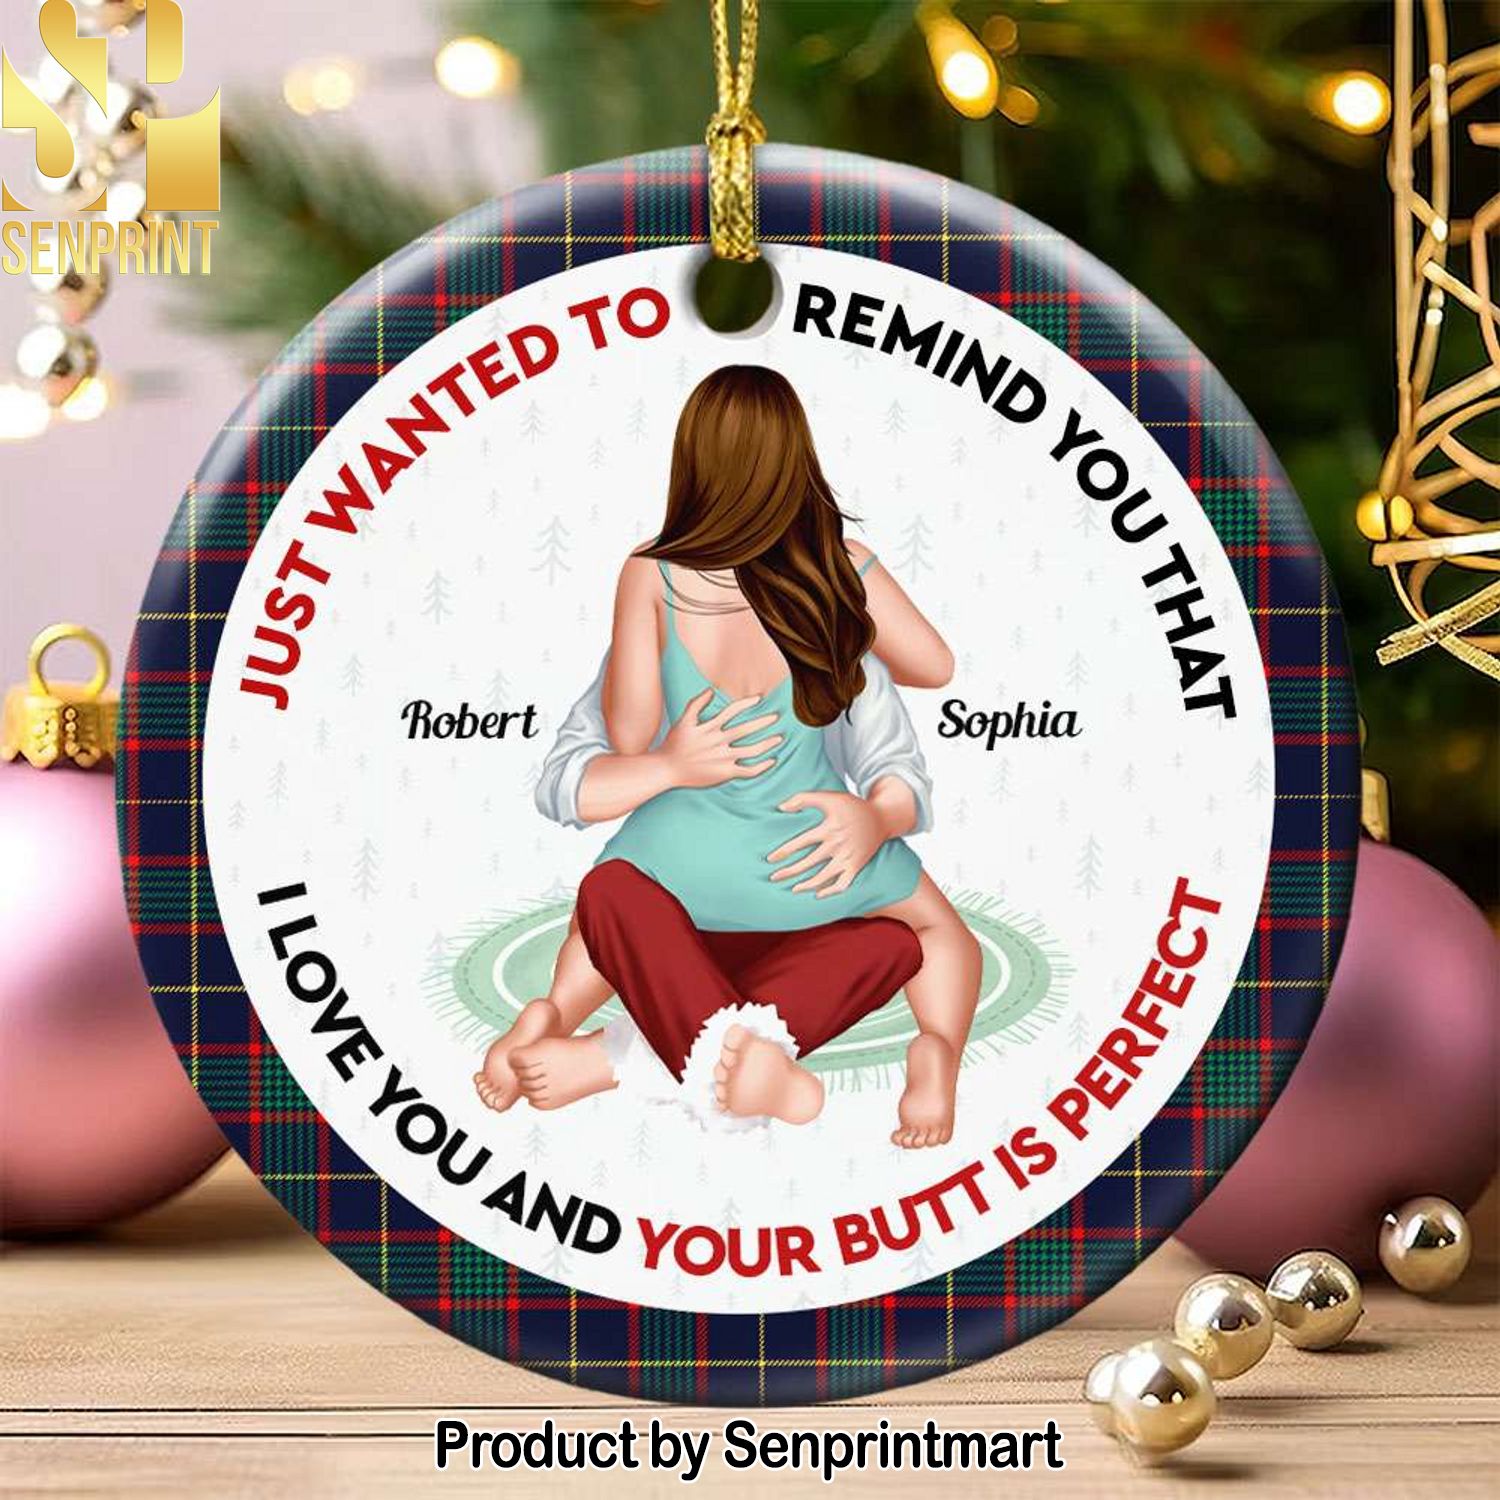 Just Want To Remind You, Couple Gift, Personalized Ceramic Ornament, Funny Couple Ornament, Christmas Gift